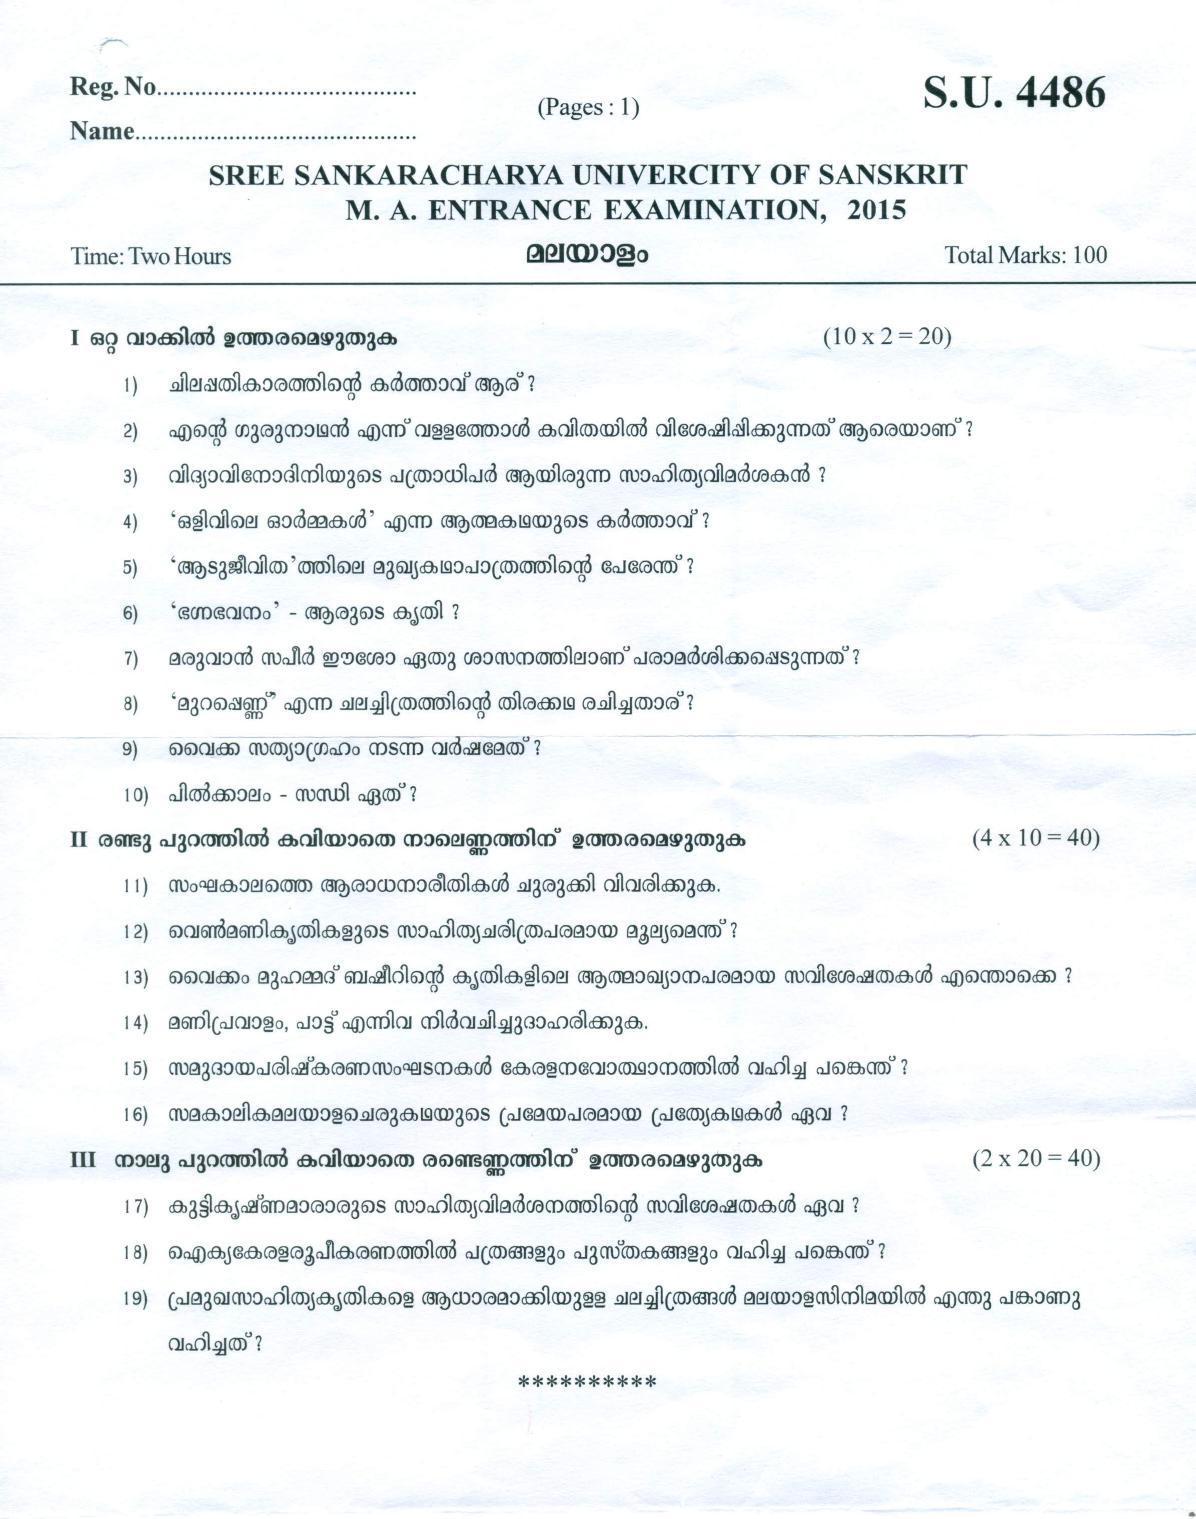 SSUS Entrance Exam MALAYALAM 2015 Question Paper - Page 1